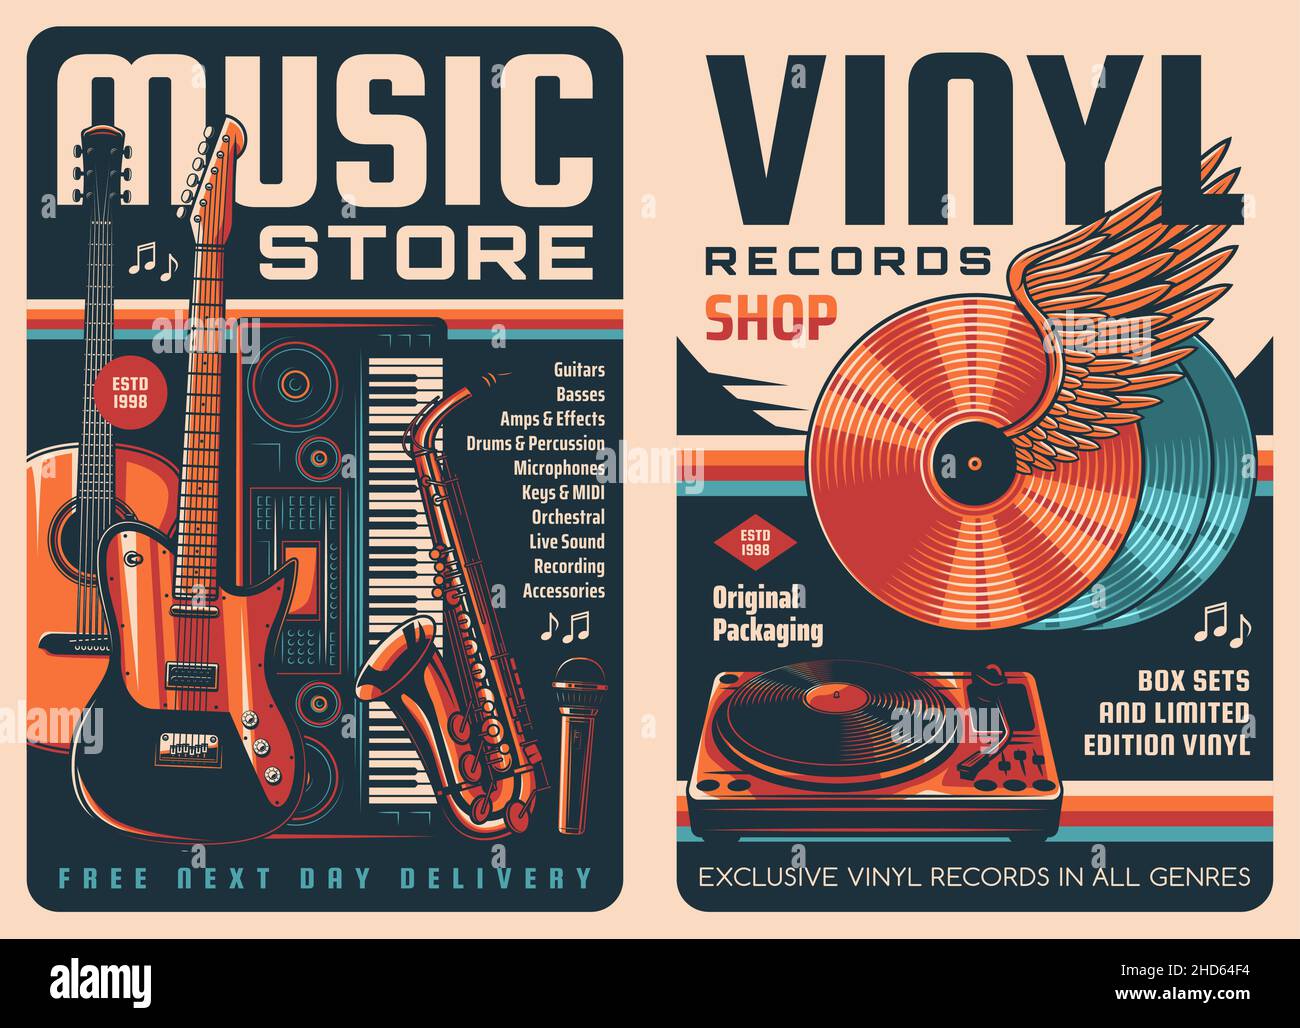 Vinyl records and music store retro posters. Vintage music records shop, musical instruments and equipment store vector banners with guitars, MIDI key Stock Vector